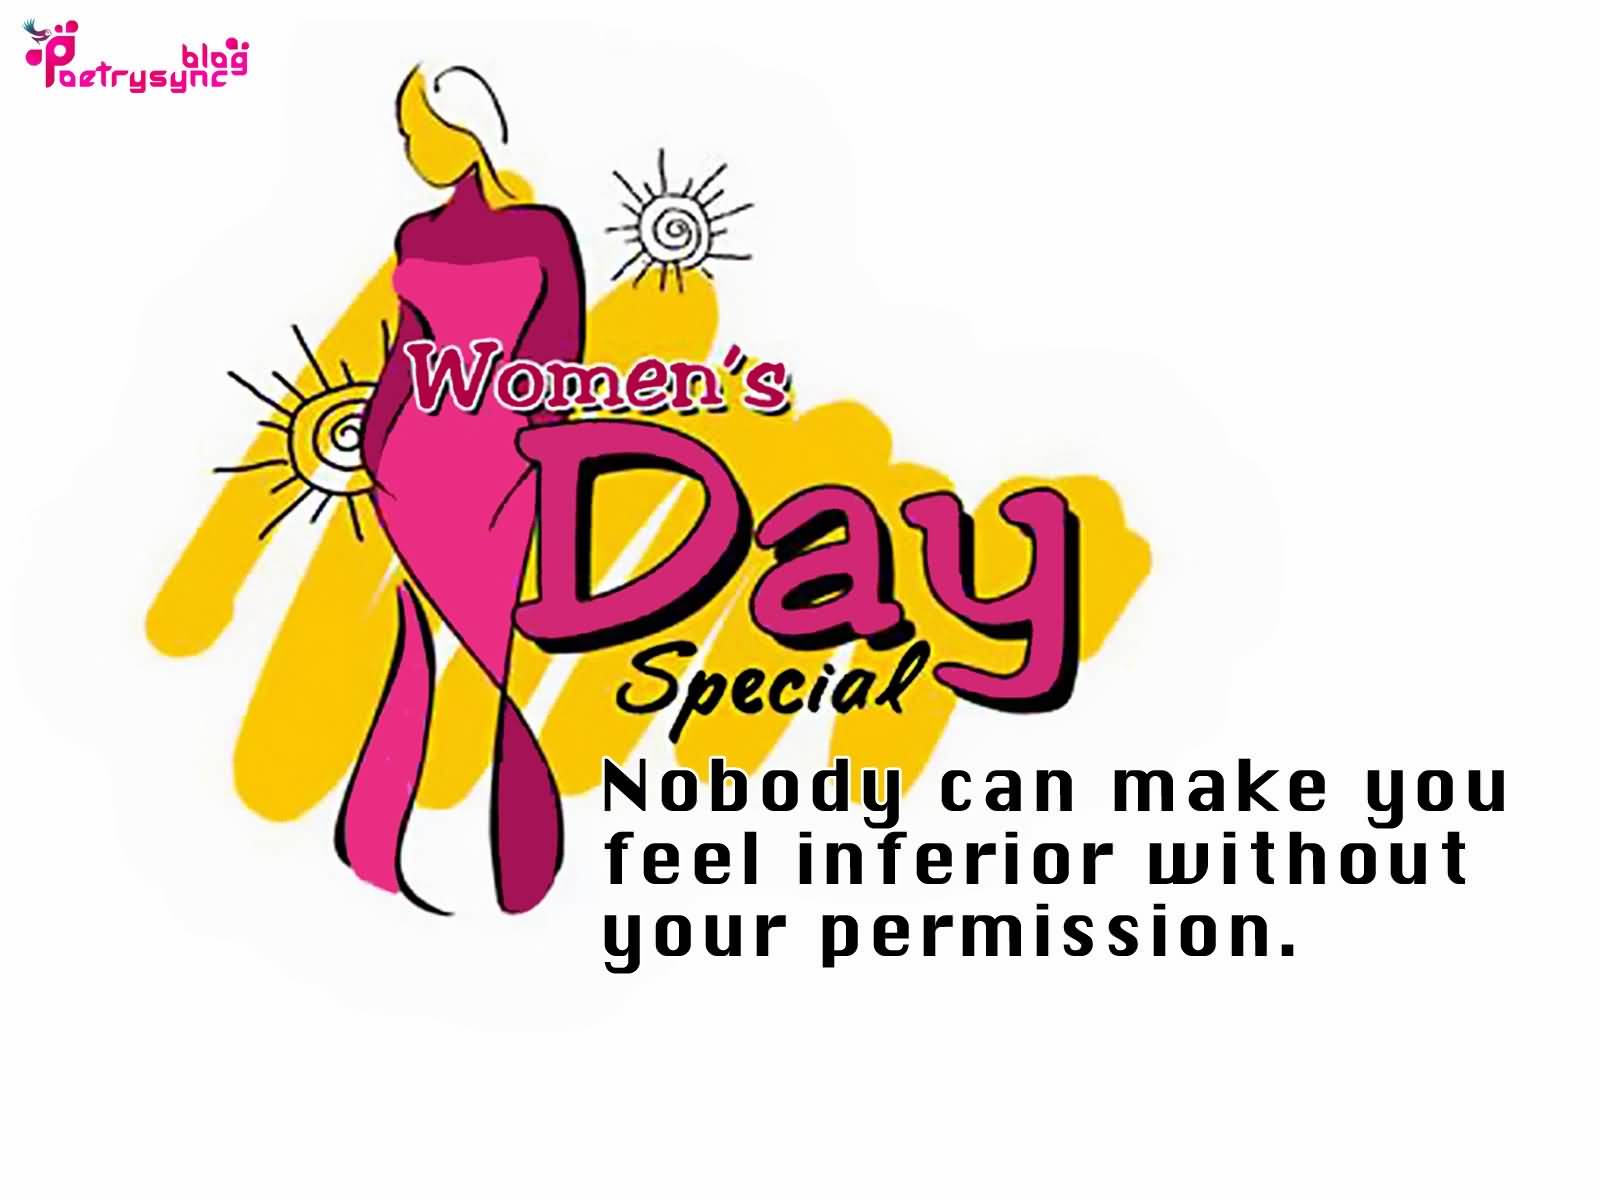 Women's Day Special Nobody Can Make You Feel Inferior Without Your Permission